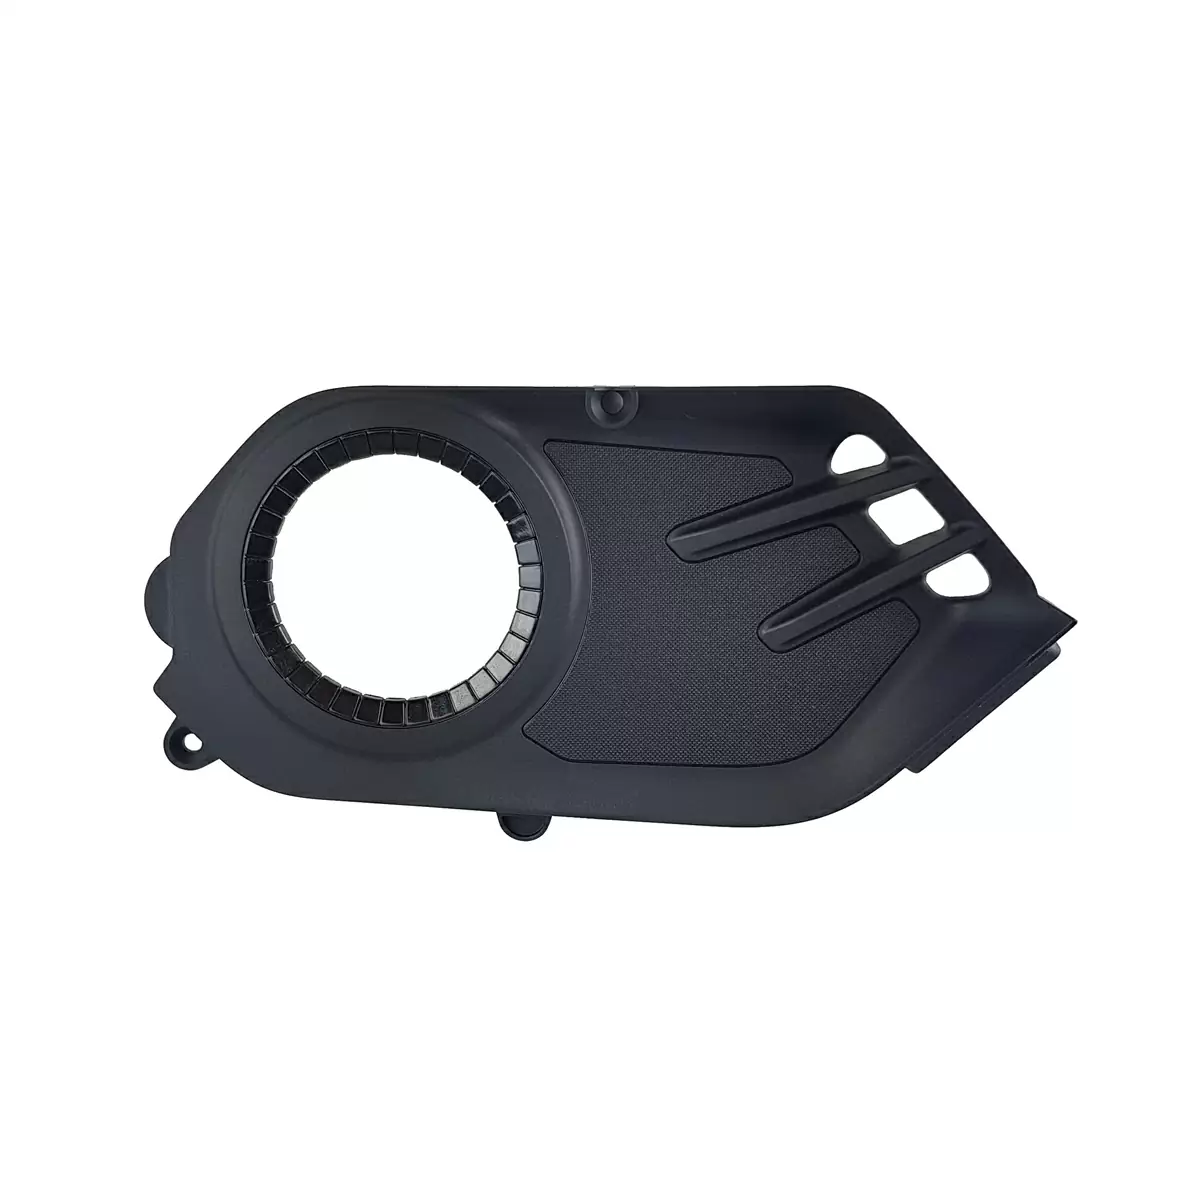 Right engine cover for PW-X2 i600wh AllMtn 6/7/SE models - image